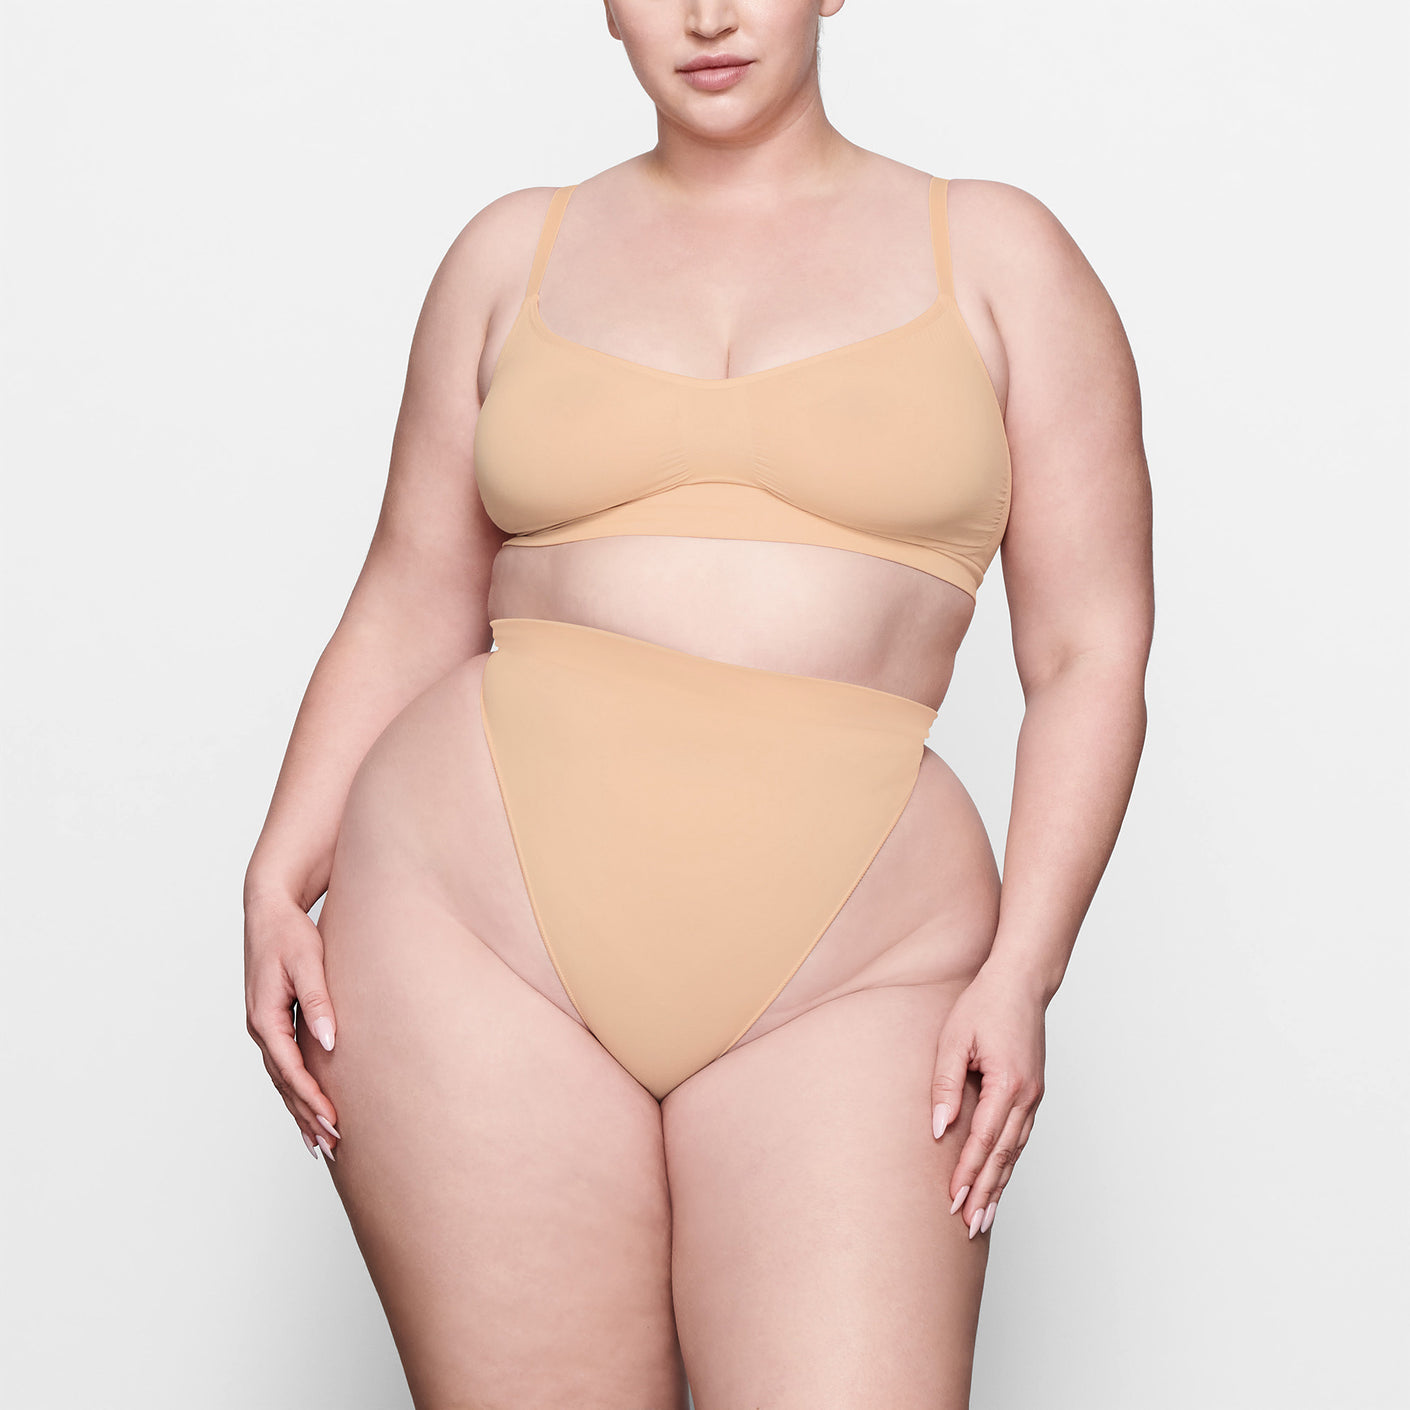 https://cdn.shopify.com/s/files/1/0259/5448/4284/products/SKIMS-SHAPEWEAR-SH-MWT-0198-MC-OCH_FR_8da5d69d-41be-4cc8-b741-938cb78fc9b8.jpg?v=1682104226&width=1410&height=1410